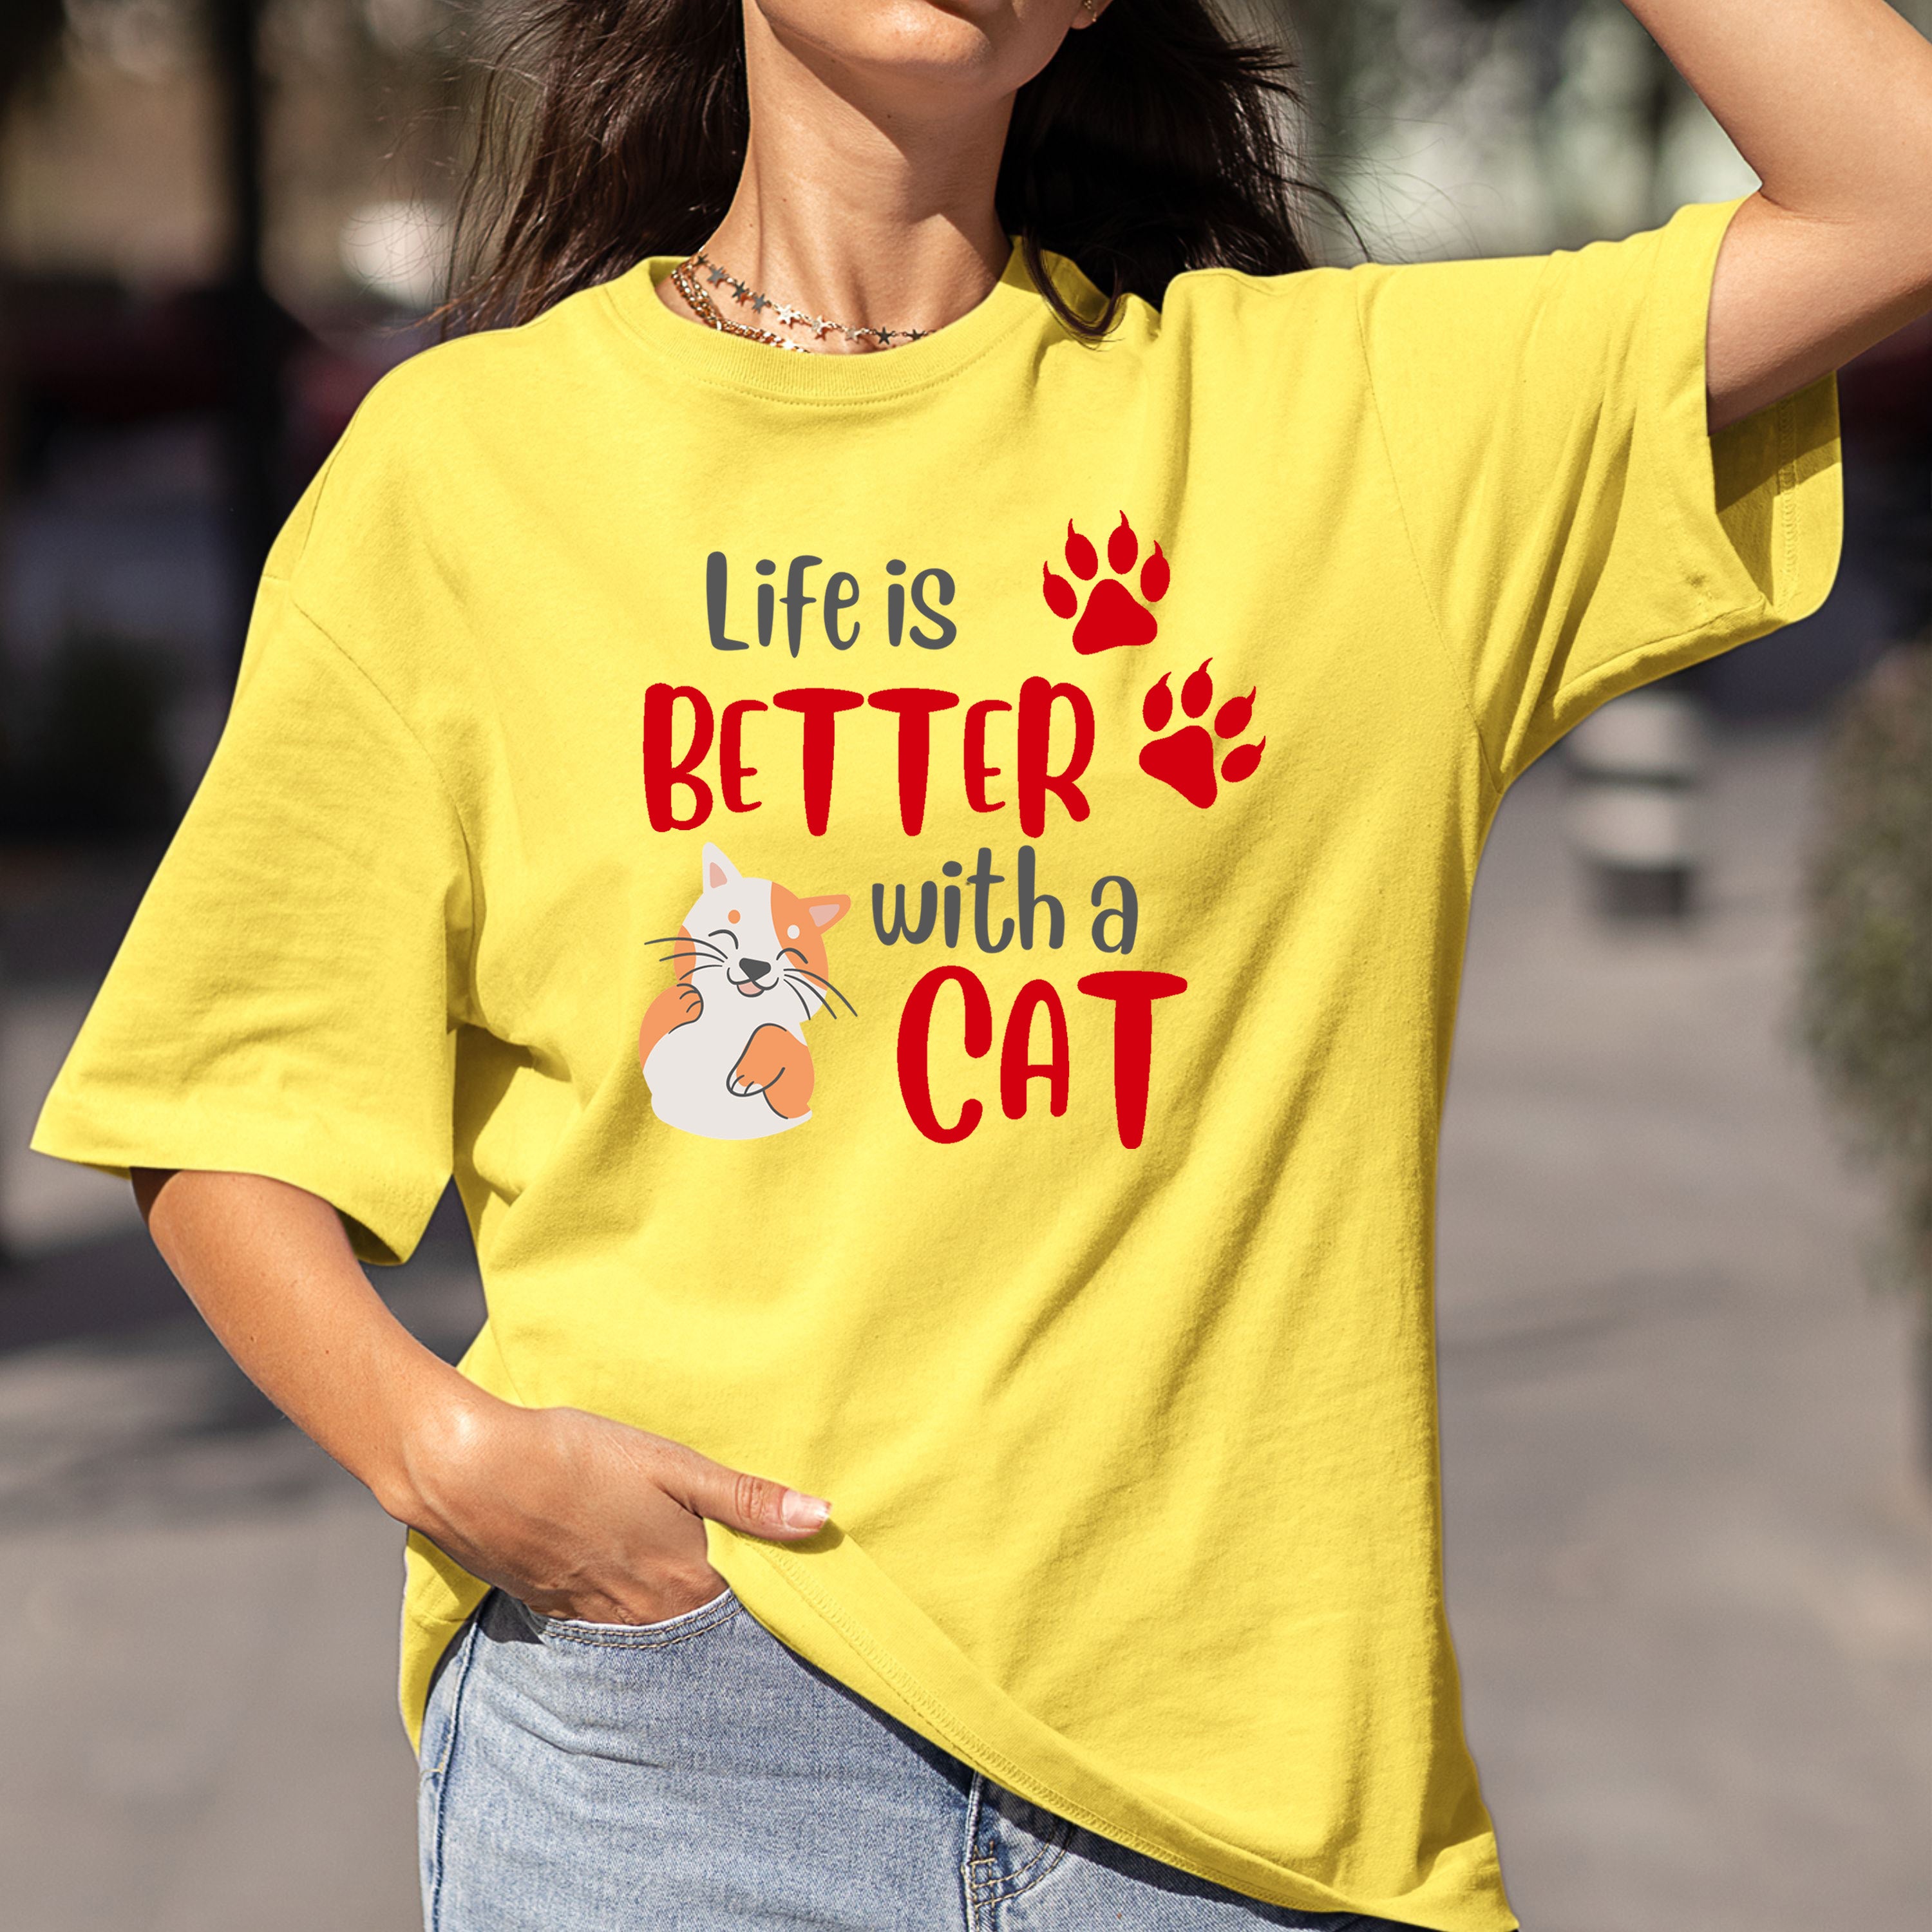 Life Is Better With Cats - Bella canvas